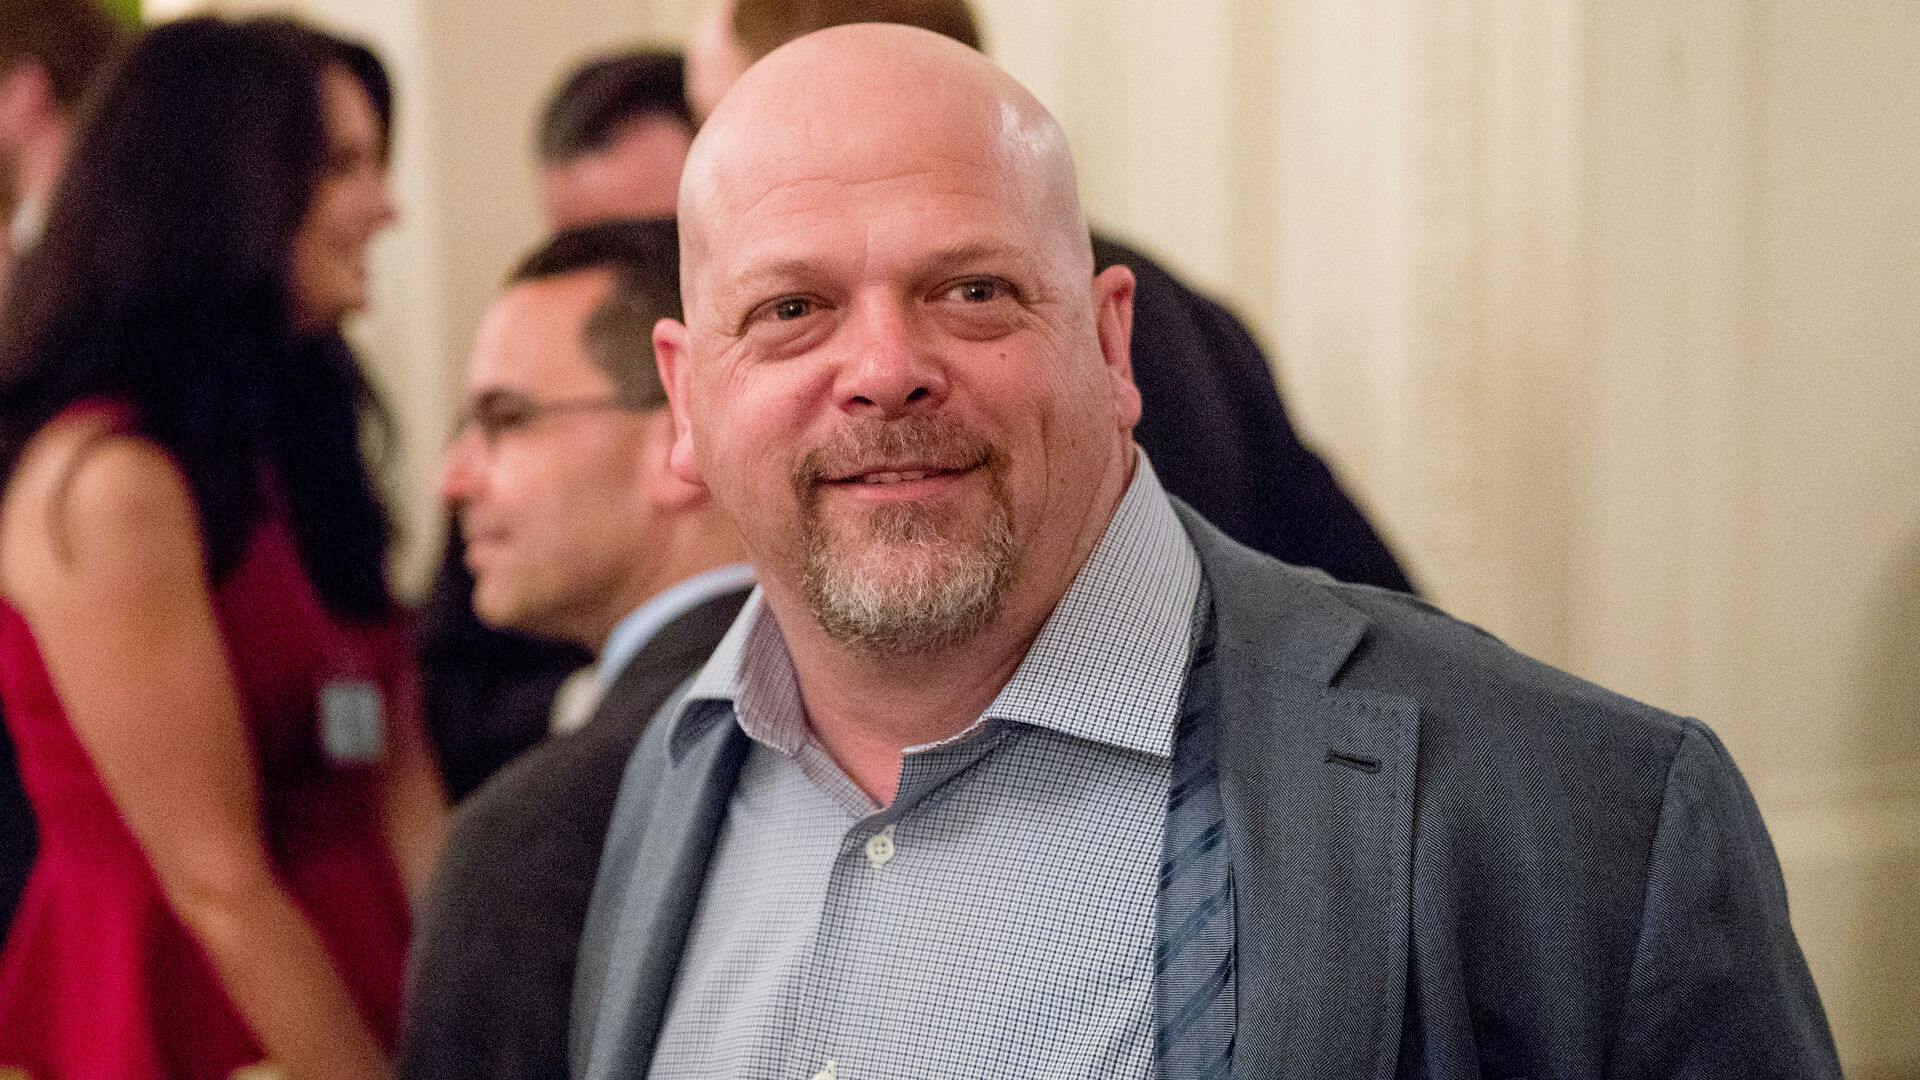 Rick Harrison, who appears on the television show Pawn Stars, arrives for a reception for Senators and their spouses in the East Room of the White House, Tuesday, March 28, 2017, in Washington. (AP Photo/Andrew Harnik)